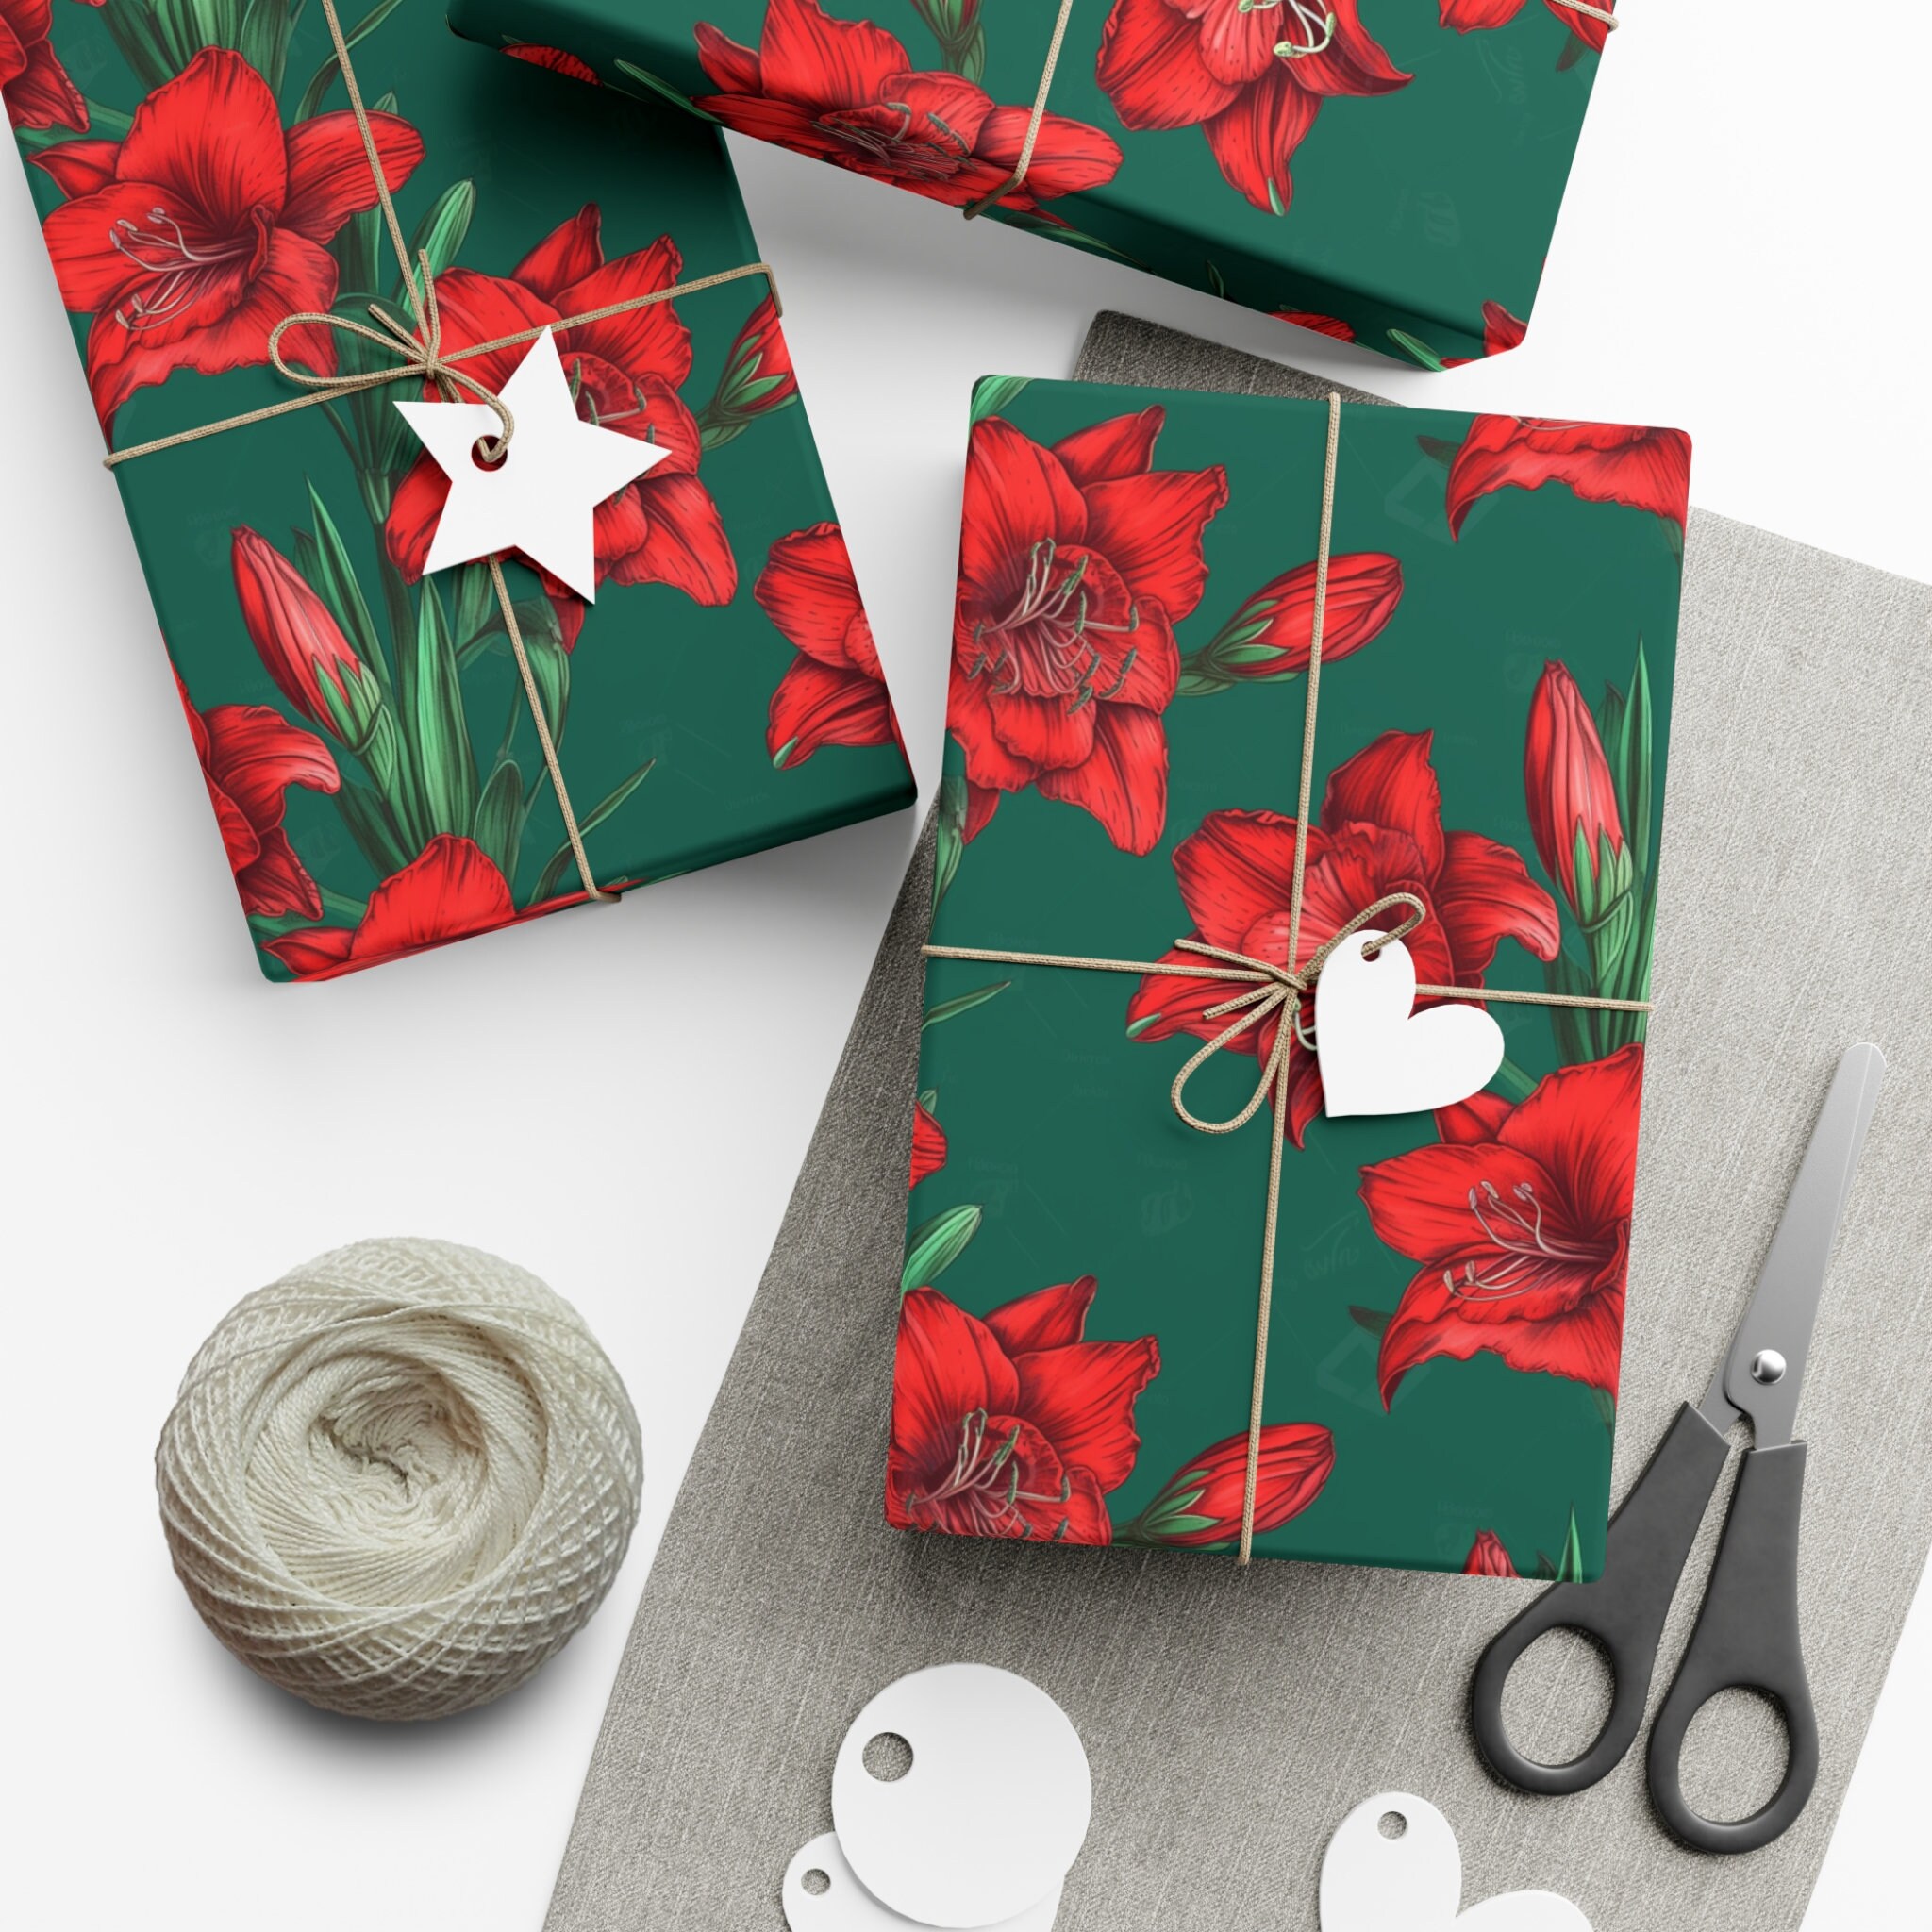 Vintage Rose Bouquet Wrapping Paper: Add a Touch of Nostalgia to